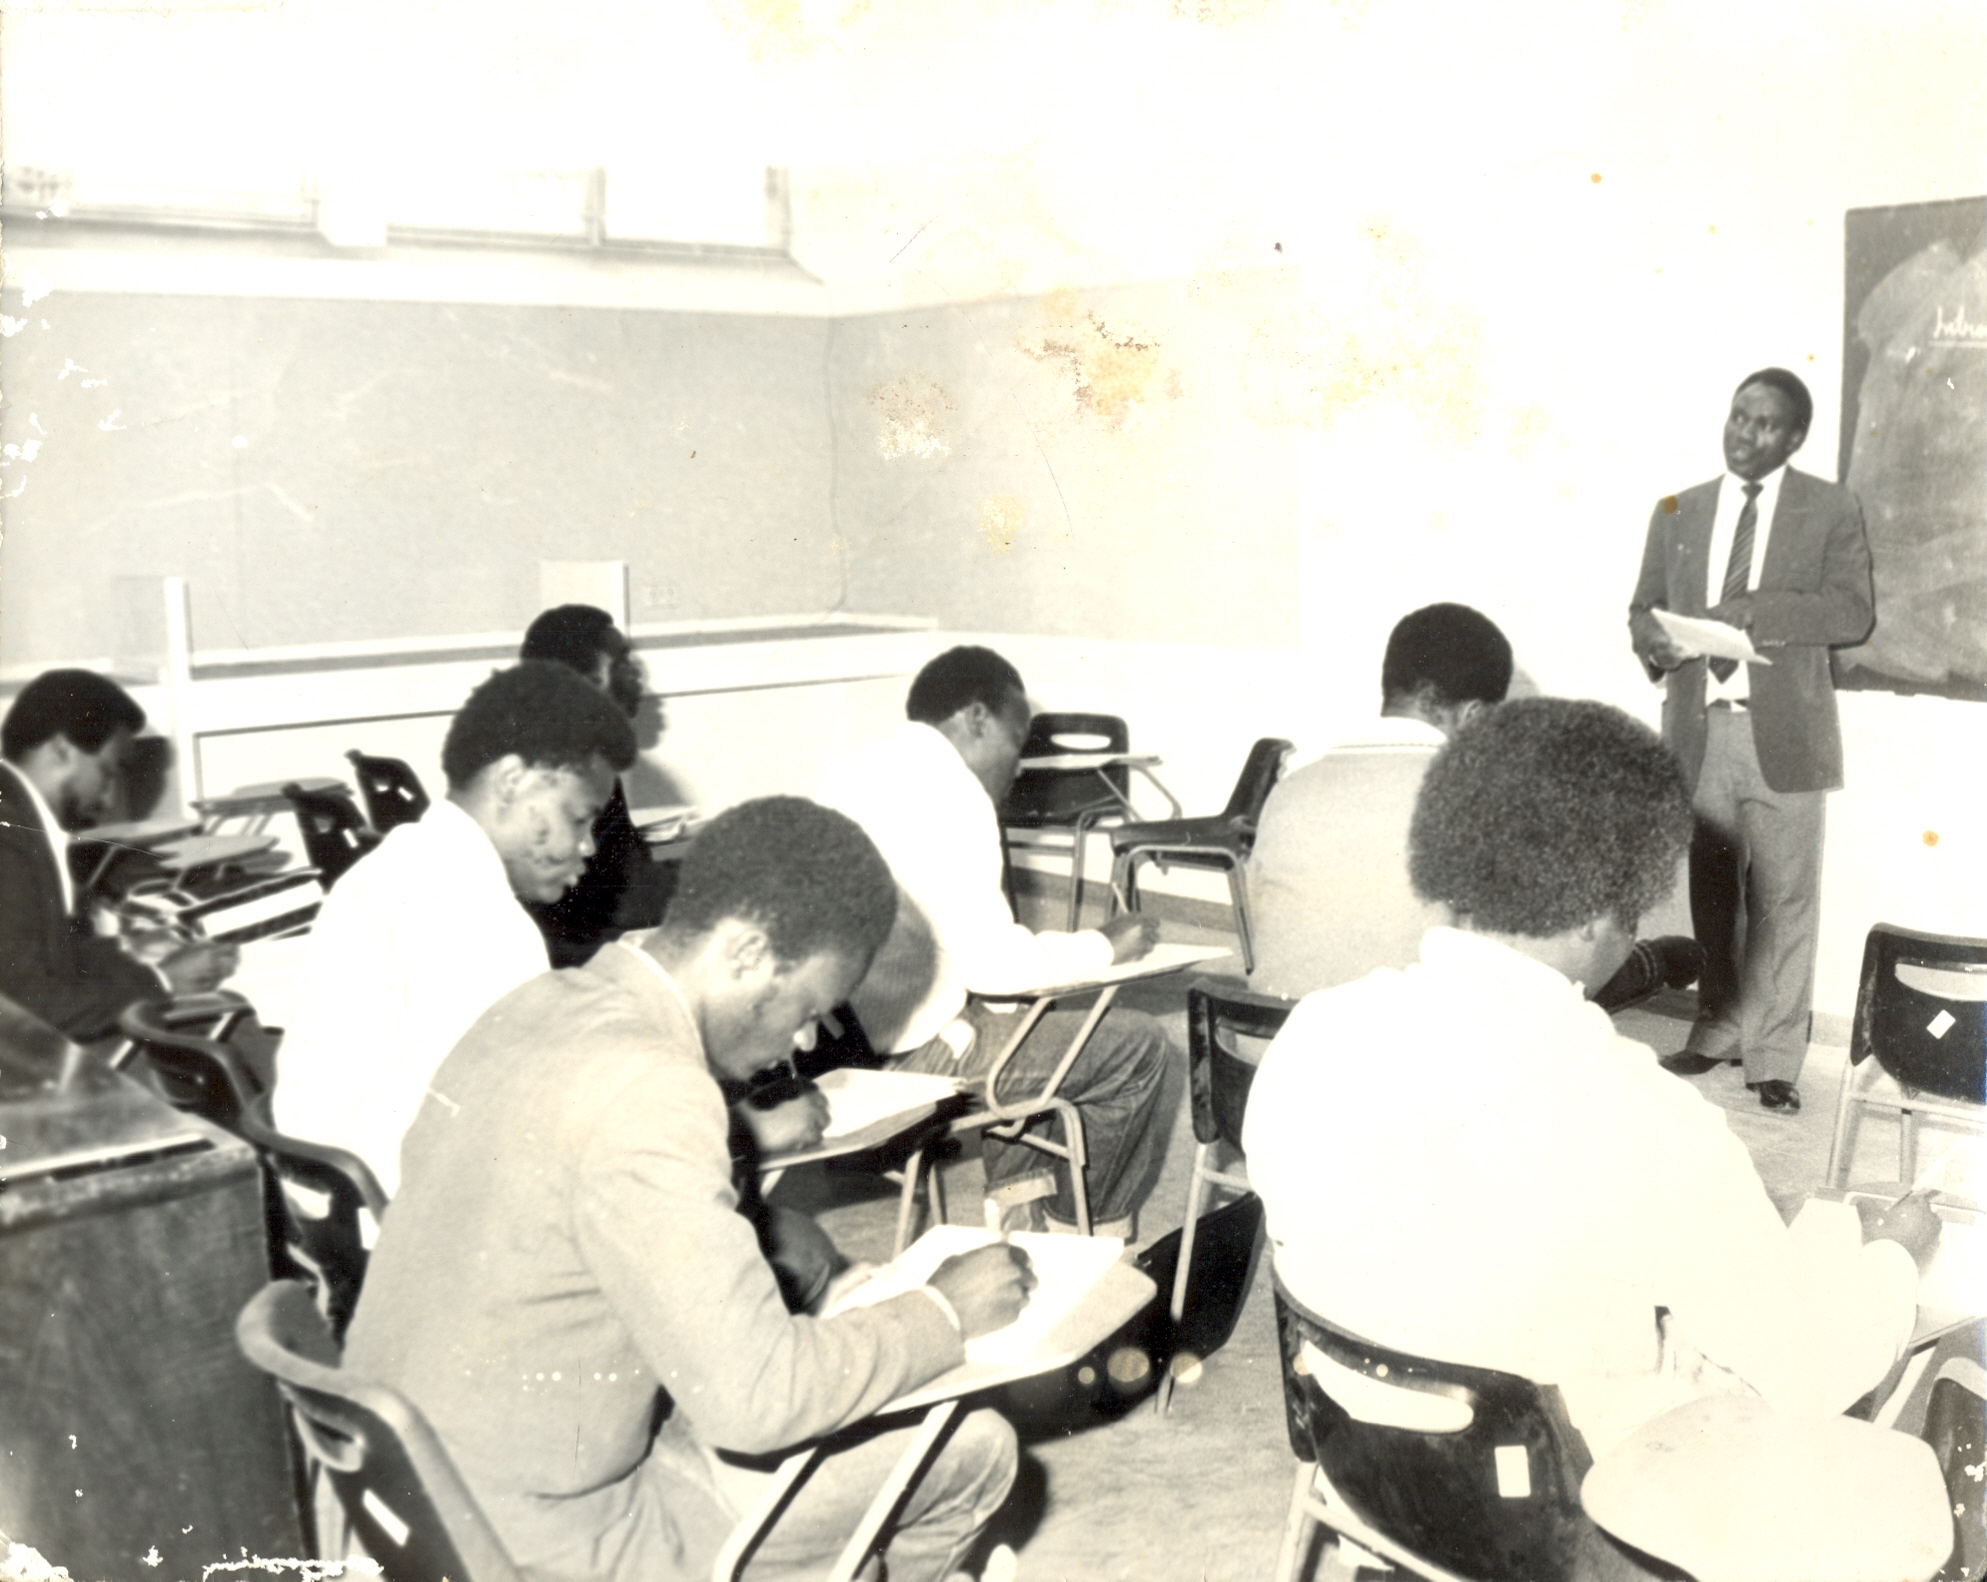 Mr. Mutuga, Lecturer, Faculty of Commerce Teaching a Class of the Red Cross, 1966